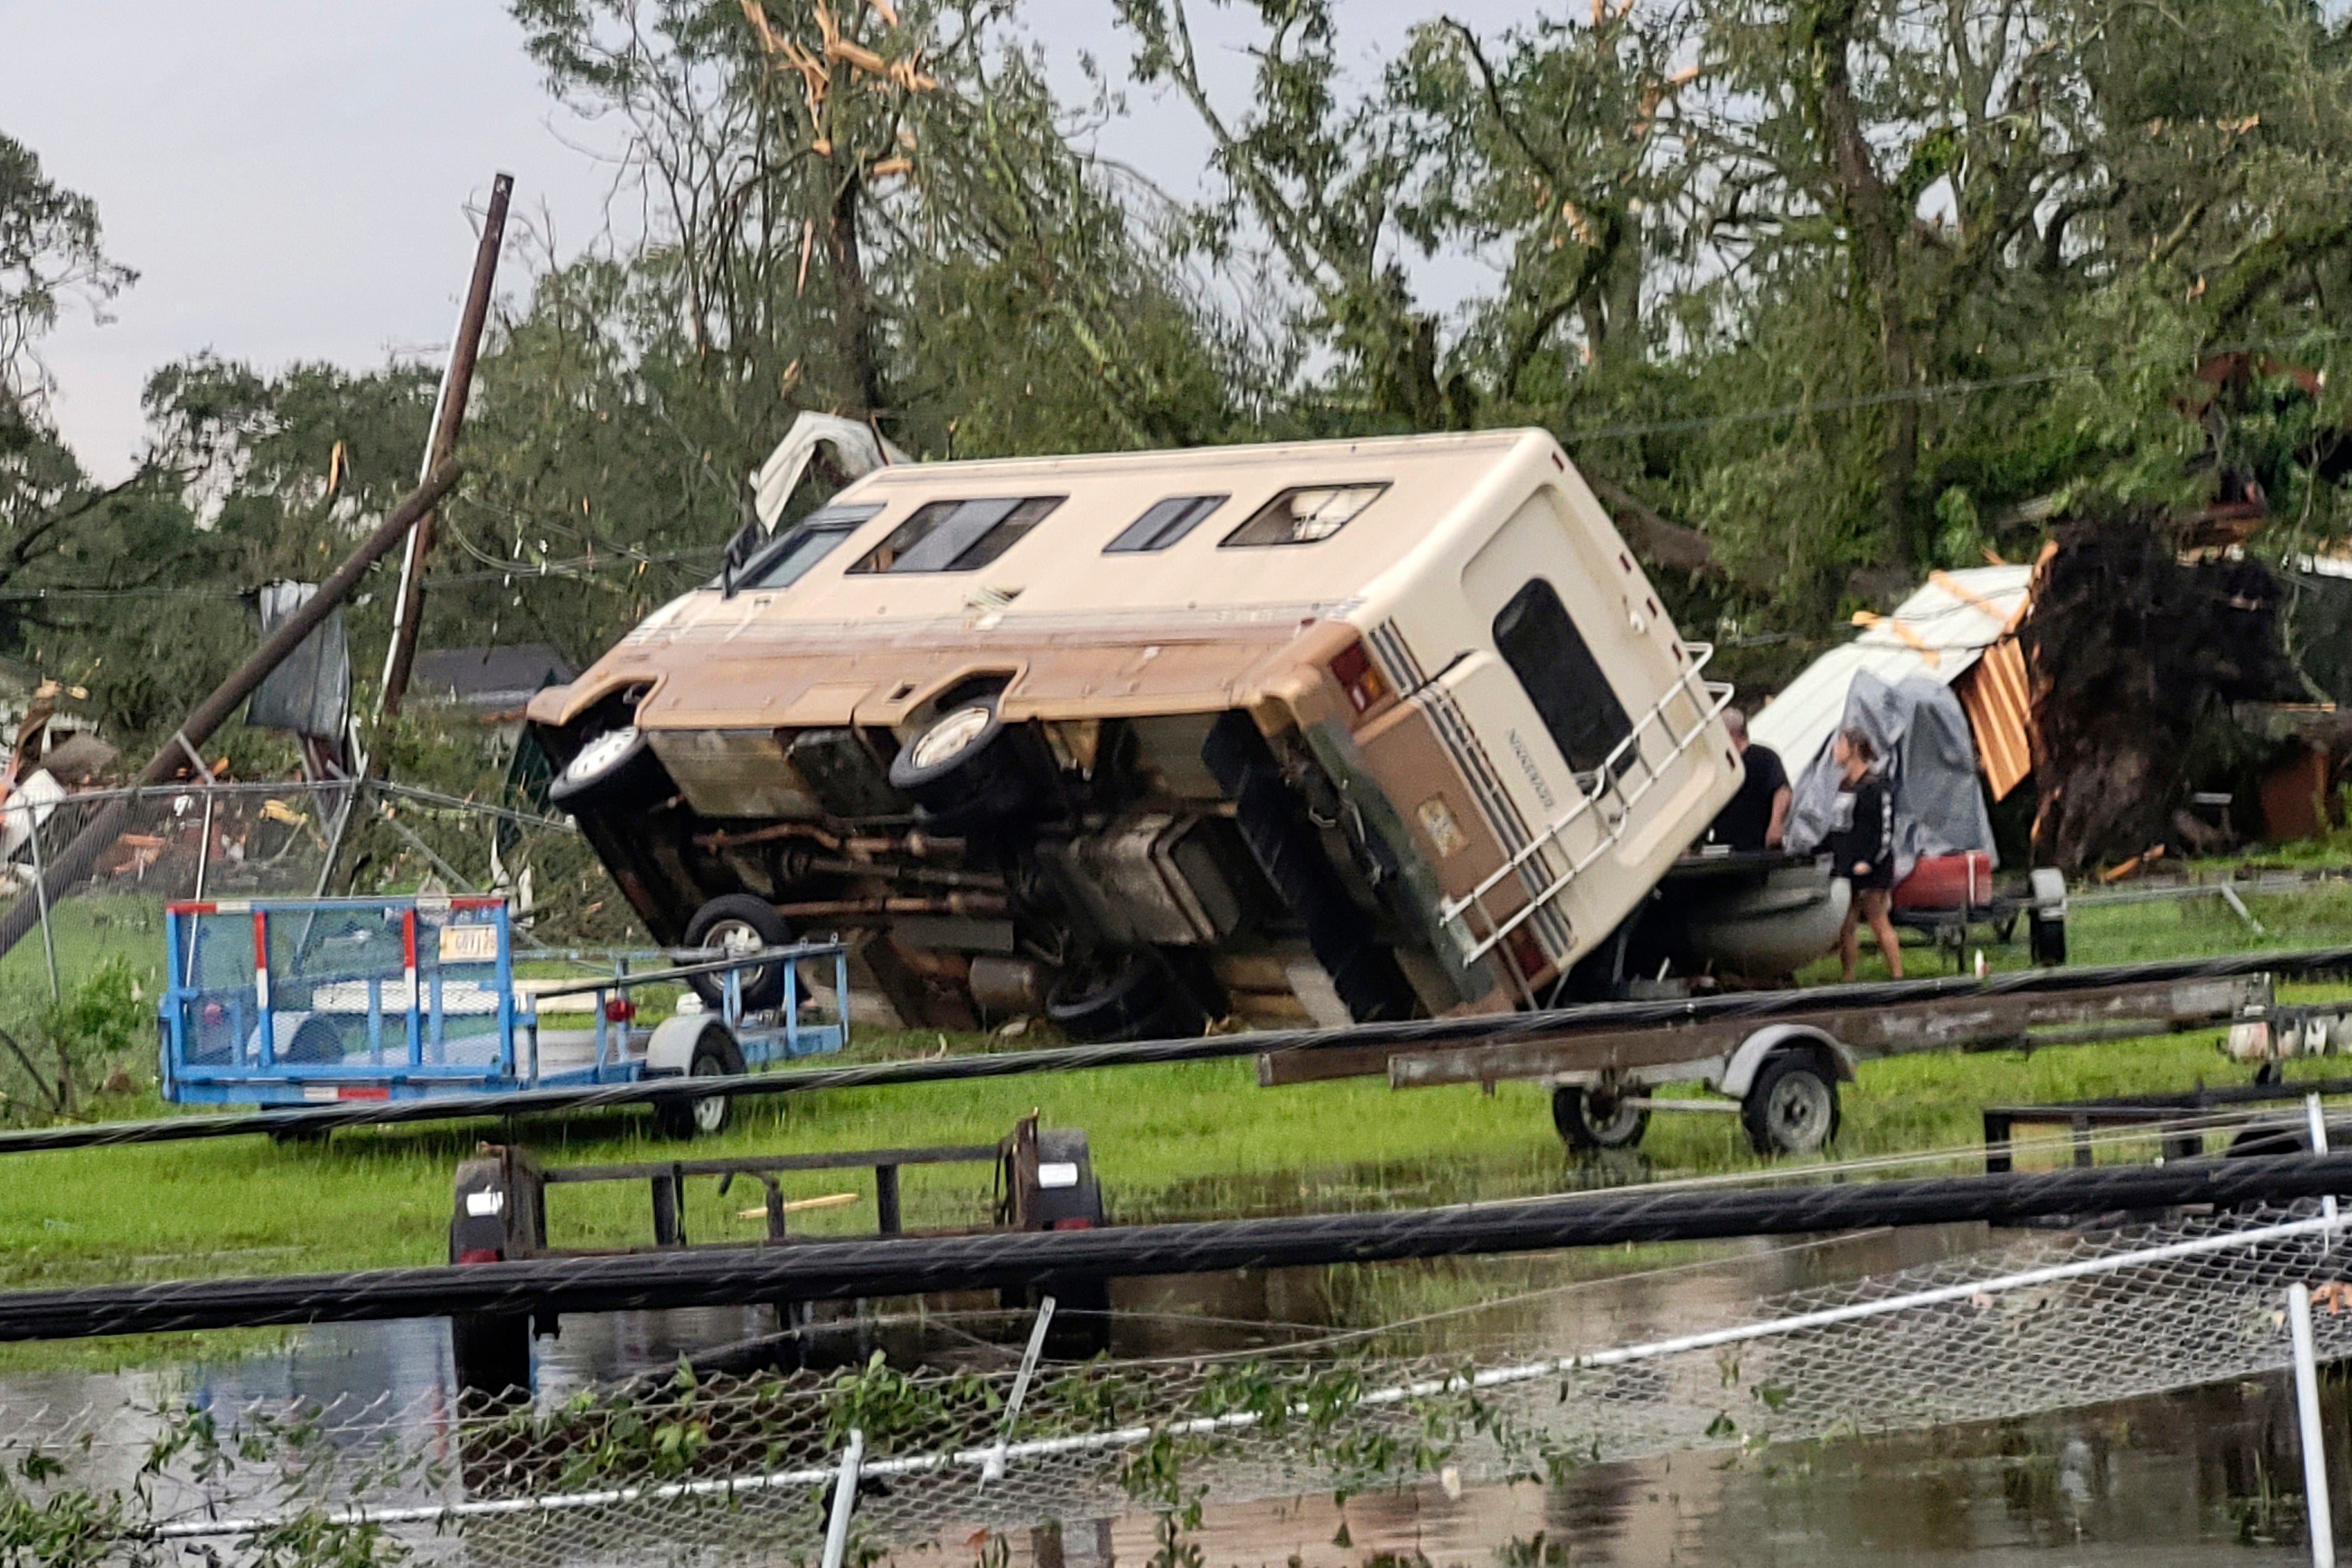 A mobile home is turned on its side off Main Street in Moss Point, Mississippi, after a tornado struck the town this month